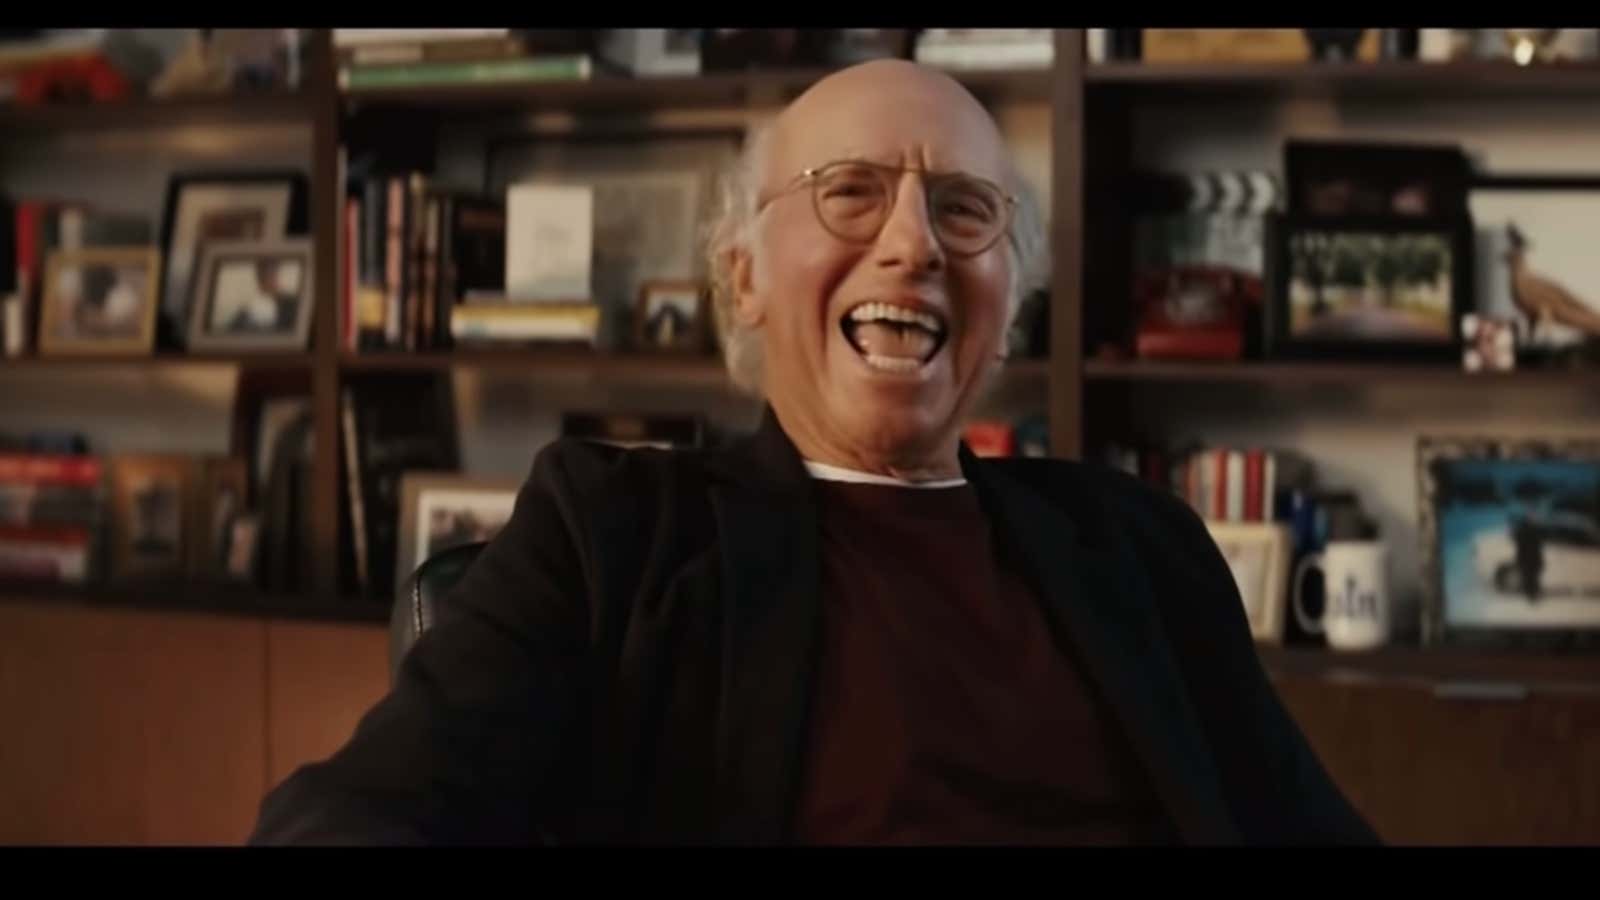 Larry David appears in the FTX Super Bowl ad.